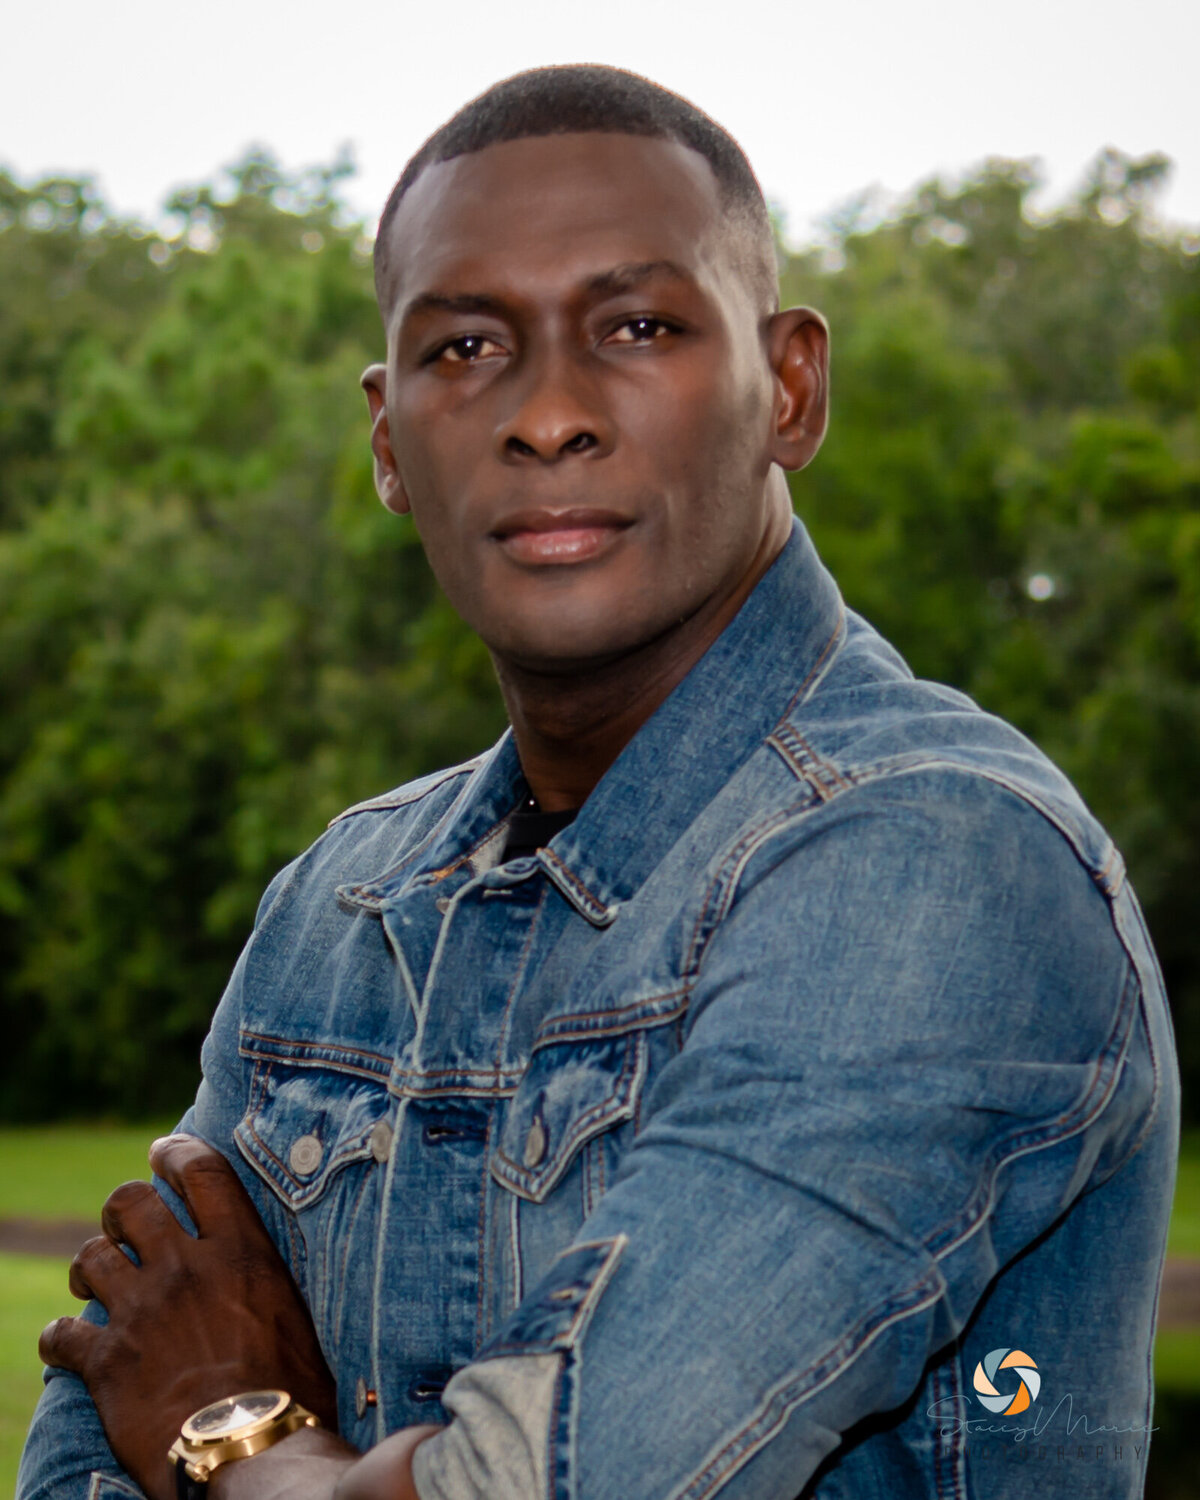 A male model poses for a headshot